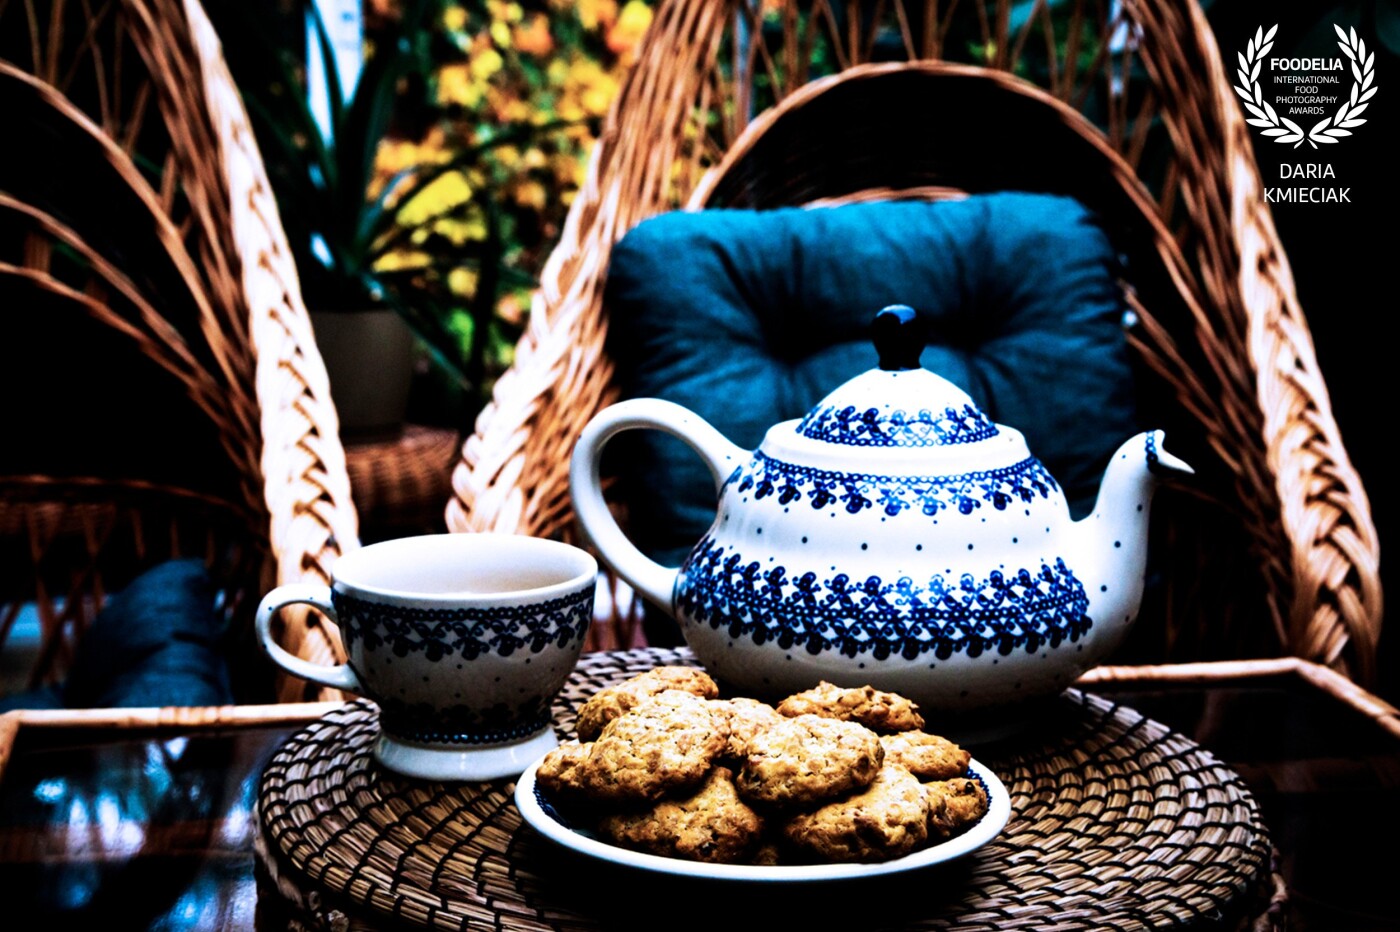 Oatcakes, hot tea in the comfort of a winter garden. The set is especially recommended for moments of relaxation, calming down and reflecting on subsequent baking.